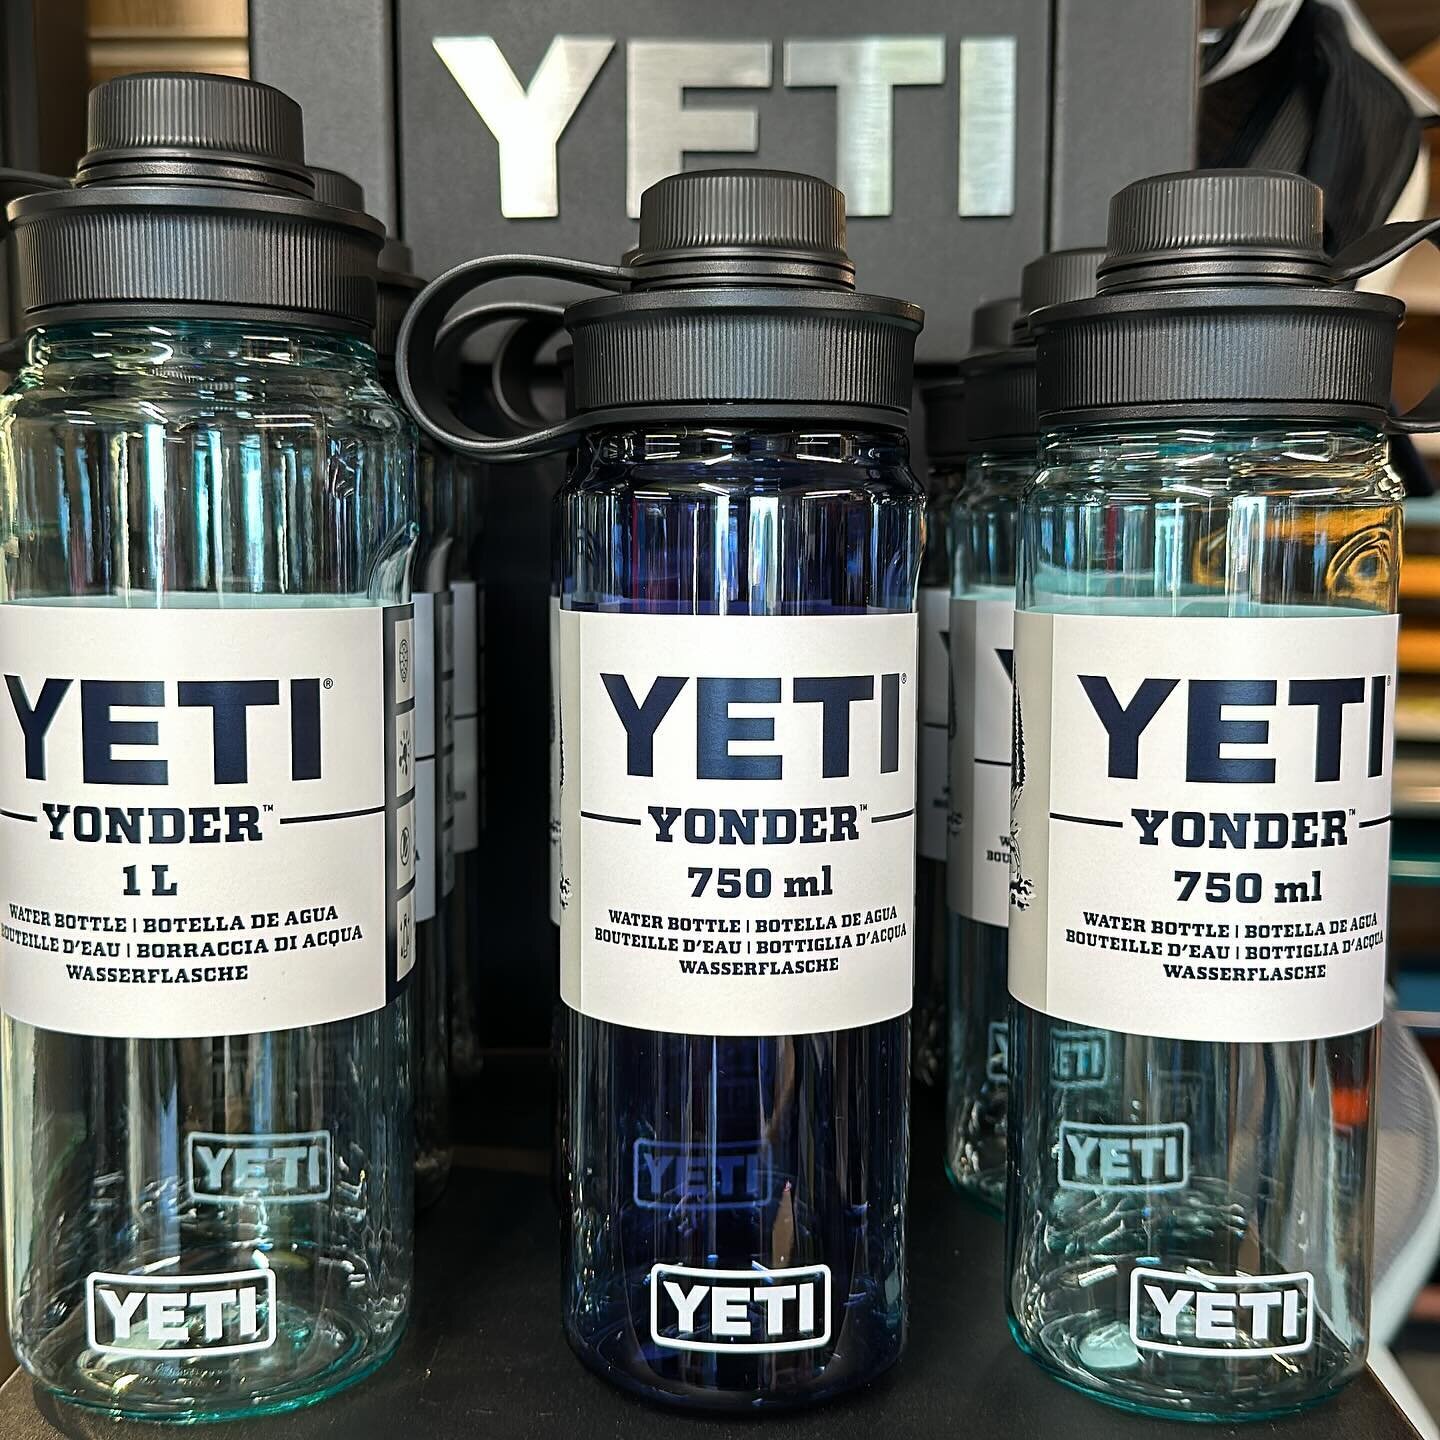 Yeti Yonder just landed ! 750ml and 1ltr instock 🎁 perfect for Christmas 🎅🏽 #supportsmallbusiness